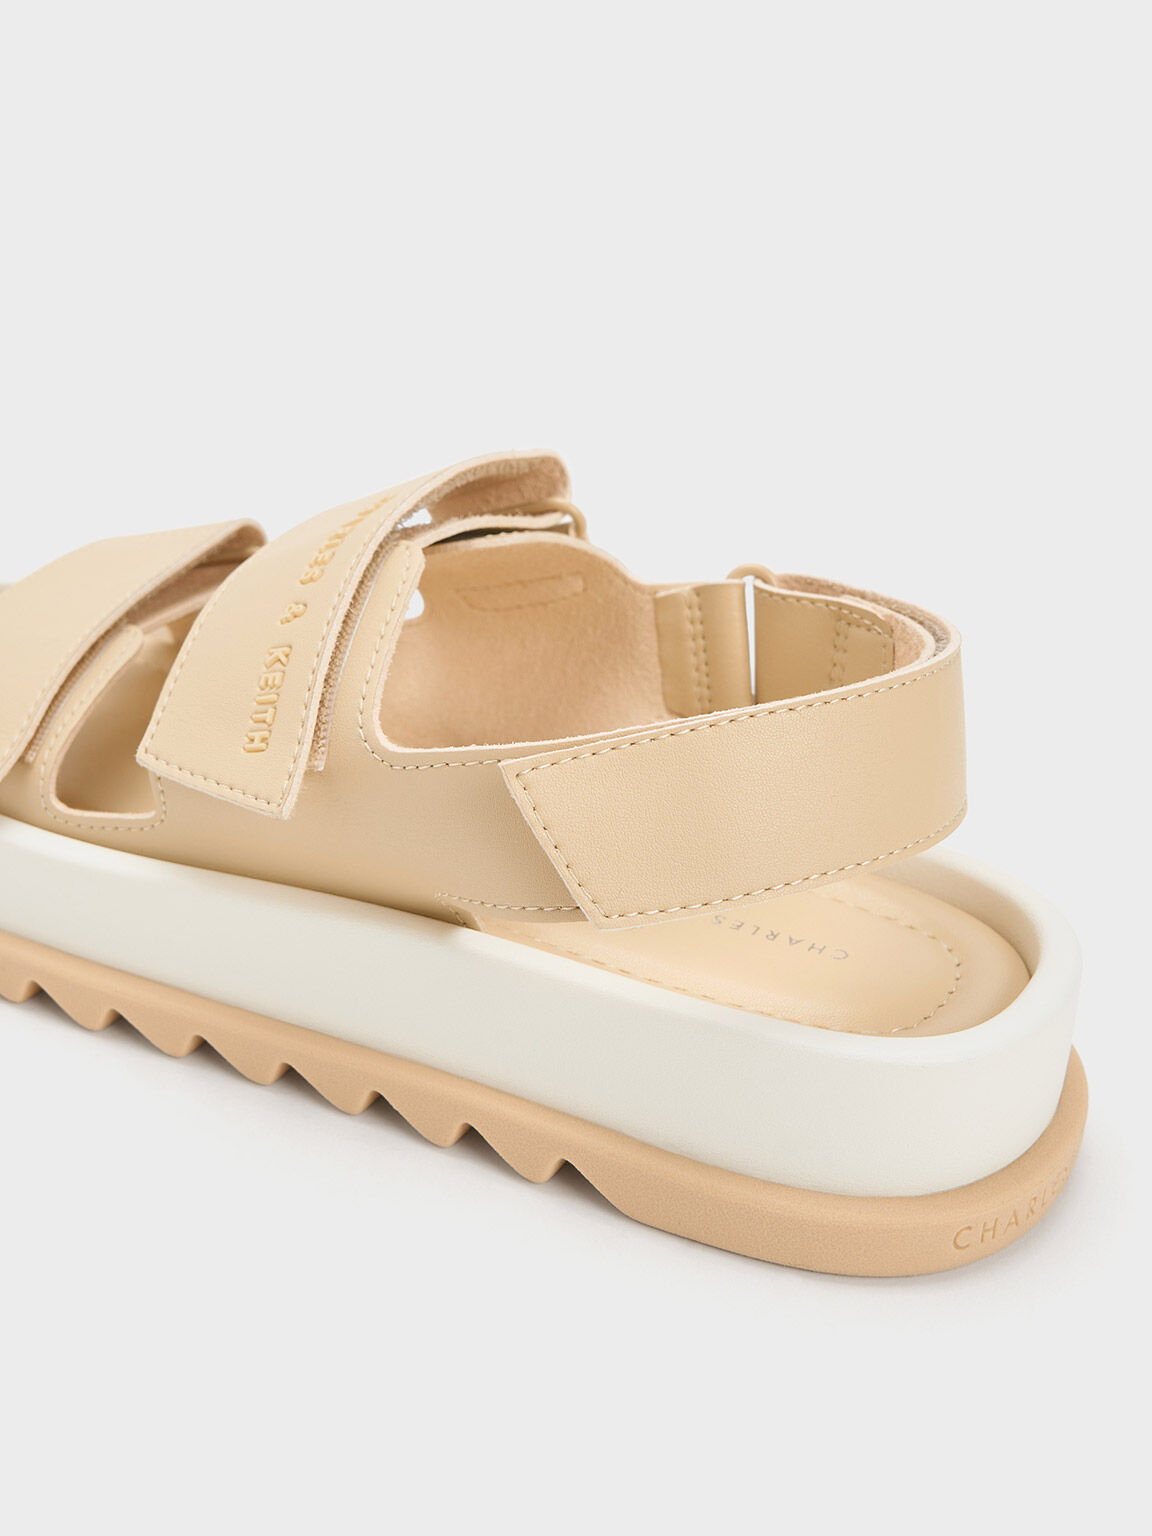 Sand Buckled Sandals - CHARLES & KEITH MX